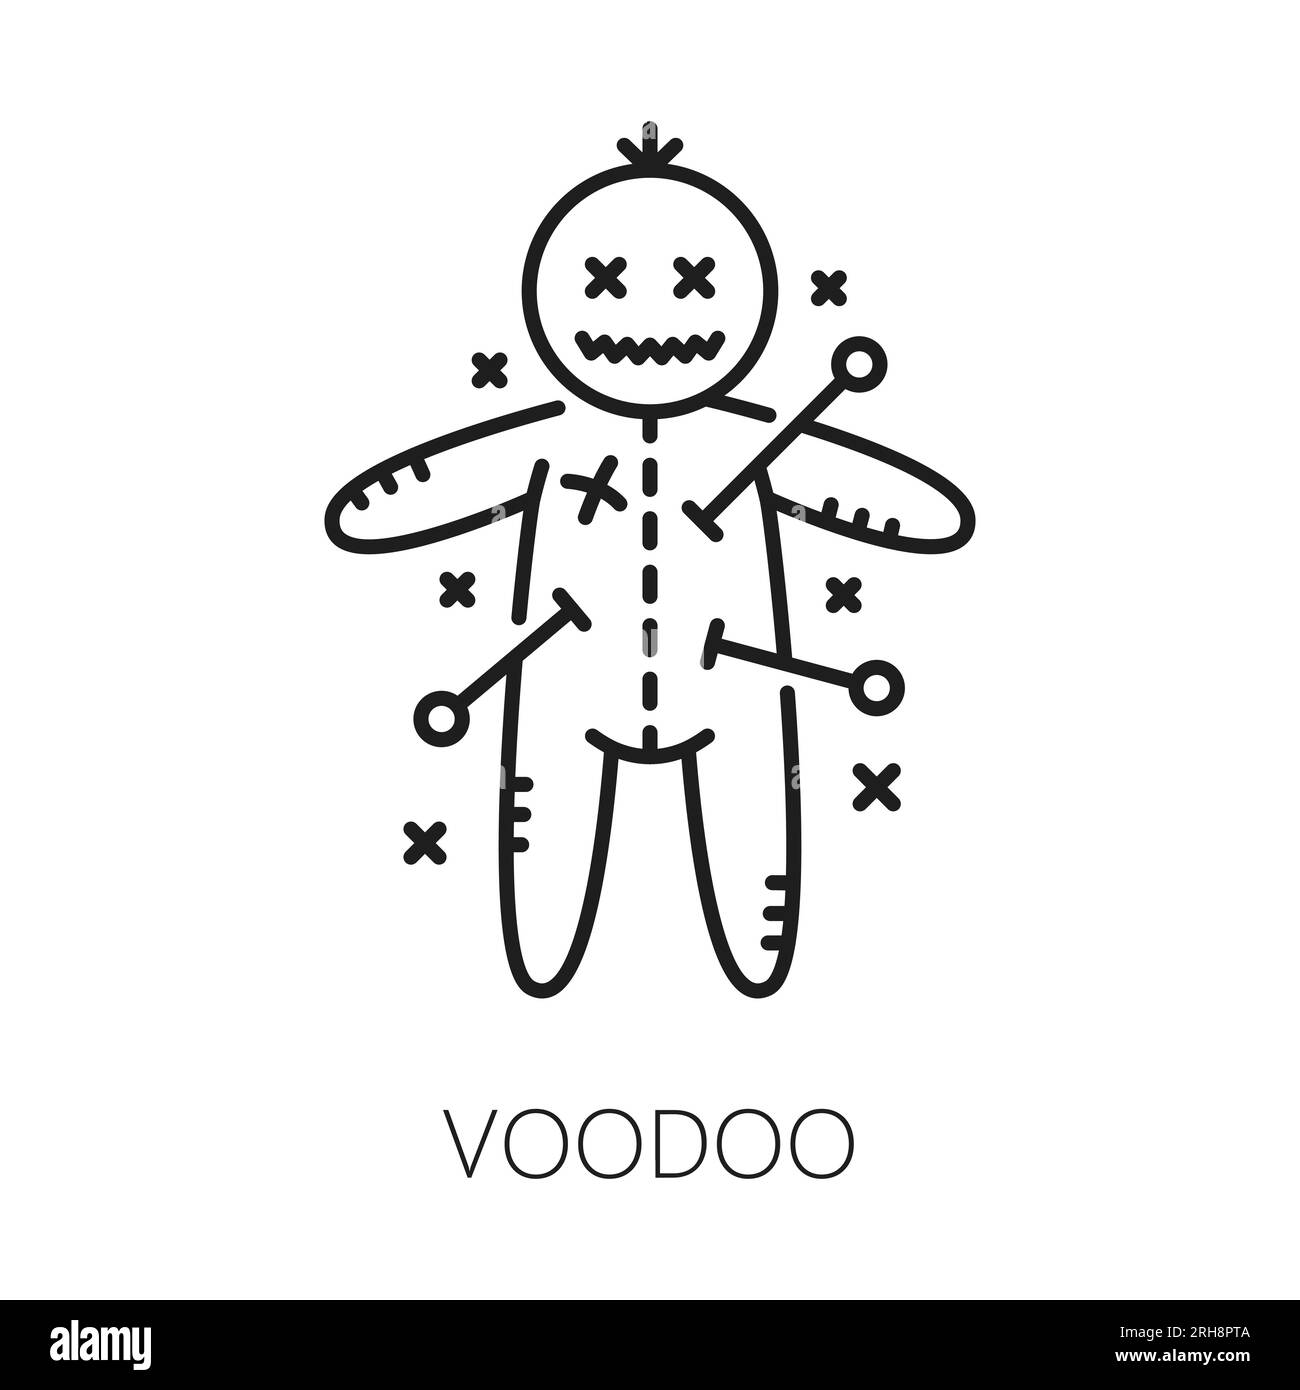 Voodoo witchcraft and magic icon. Mystery, esoteric, astrology symbol. Witchcraft object or sorcery curse linear vector symbol black magic thin line icon or sign with voodoo doll pierced by pins Stock Vector